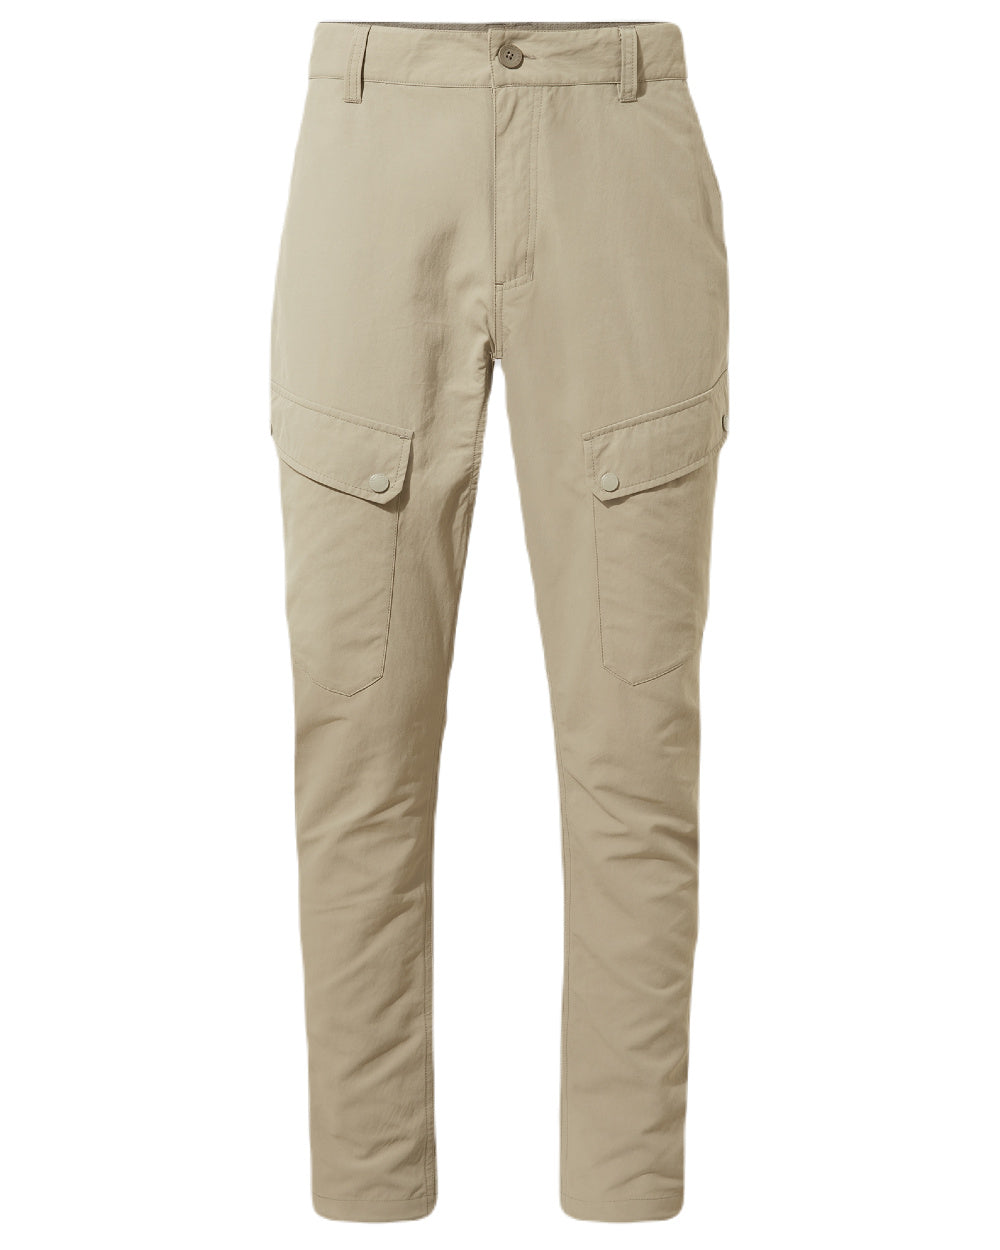 Pebble Coloured Craghoppers Mens NosiLife Adventure Trousers On A White Background 